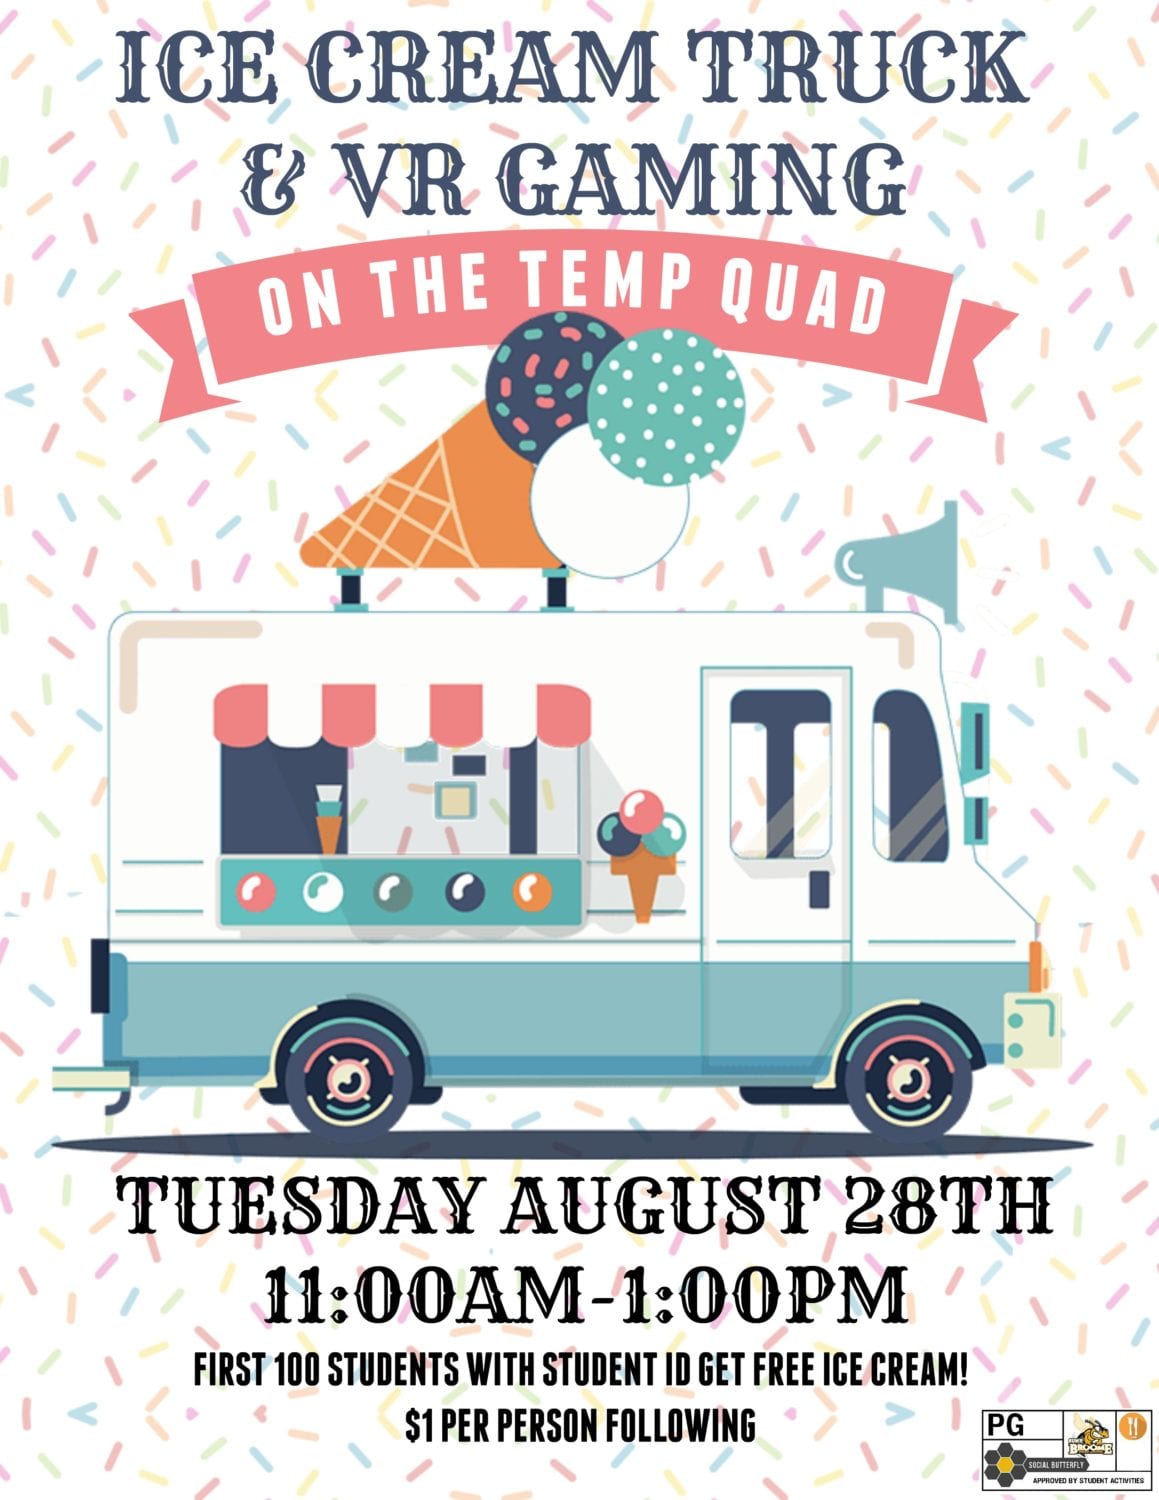 Virtual Reality Gaming with Ice Cream Truck on Aug. 28